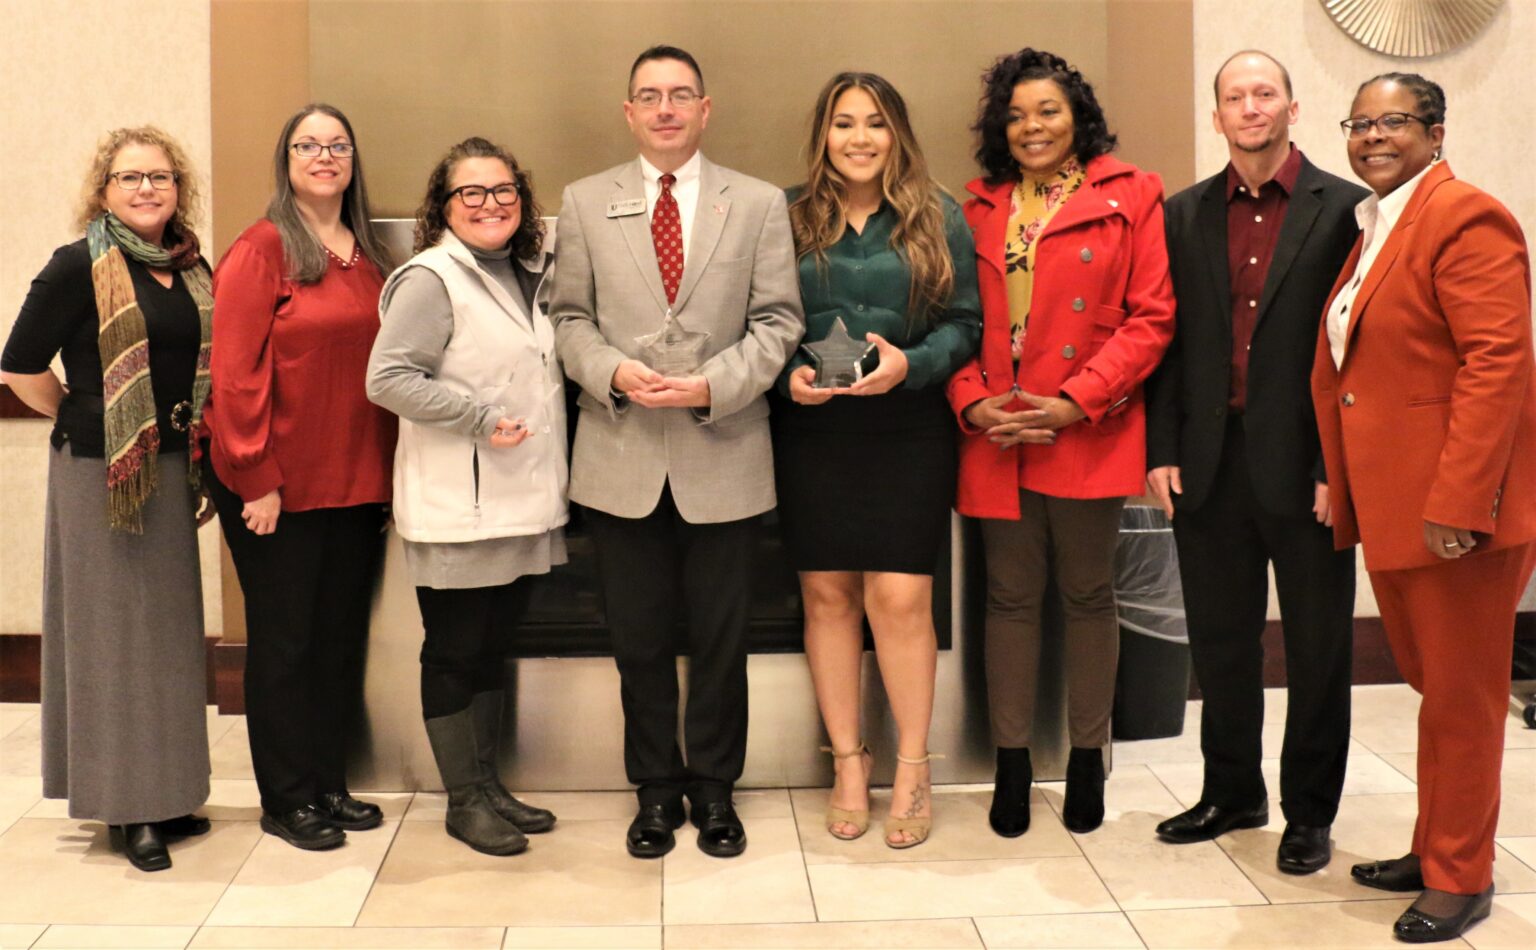 Members of the Oklahoma Housing Finance Agency homeownership department congratulate 2022 Leading Light Lending Partner award recipients. Pictured, from left, Angie Thies, OHFA homeownership specialist; Kristina Nichols, OHFA homeownership supervisor; Barb Yeary, Stride Bank business development manager; Bryan Carroll, First United Bank & Trust mortgage lending consultant; Yahaira Velasco, Associated Mortgage Corporation mortgage loan officer; Stephanie Hollier, OHFA homeownership specialist; Daniel Truitt, OHFA homeownership specialist; and Valenthia Doolin, OHFA homeownership director.